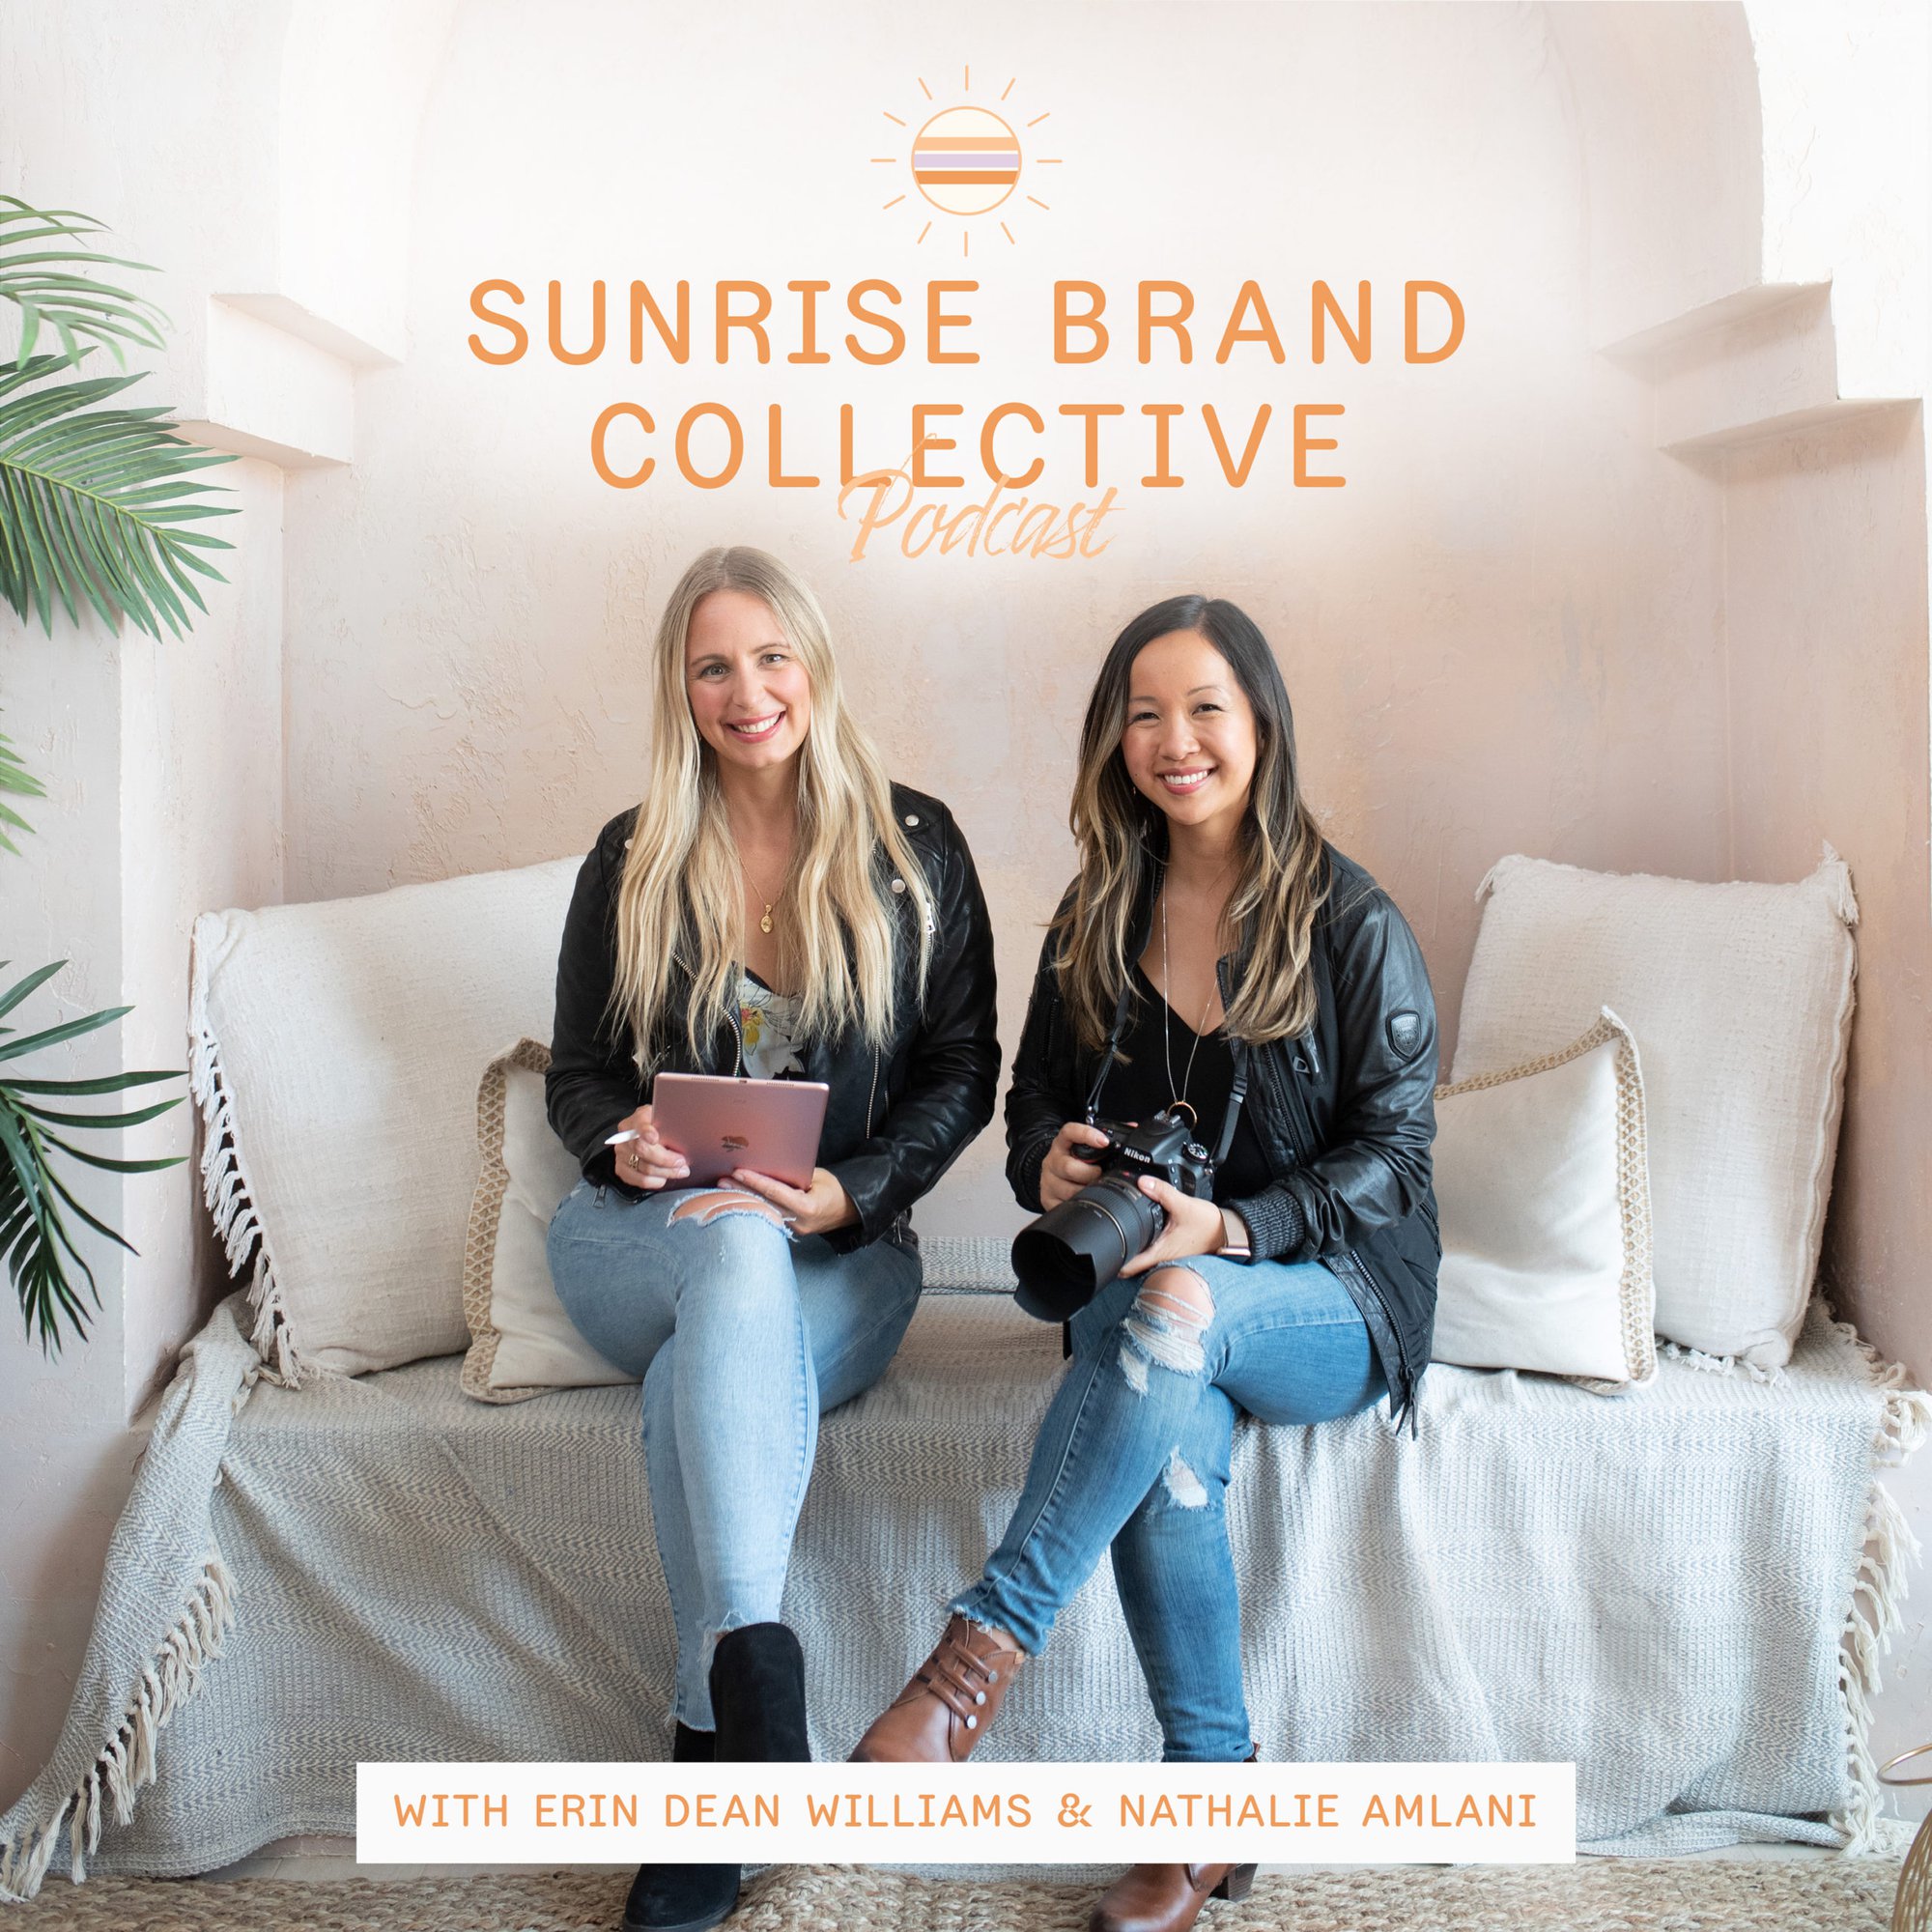 The Sunrise Brand Collective Podcast